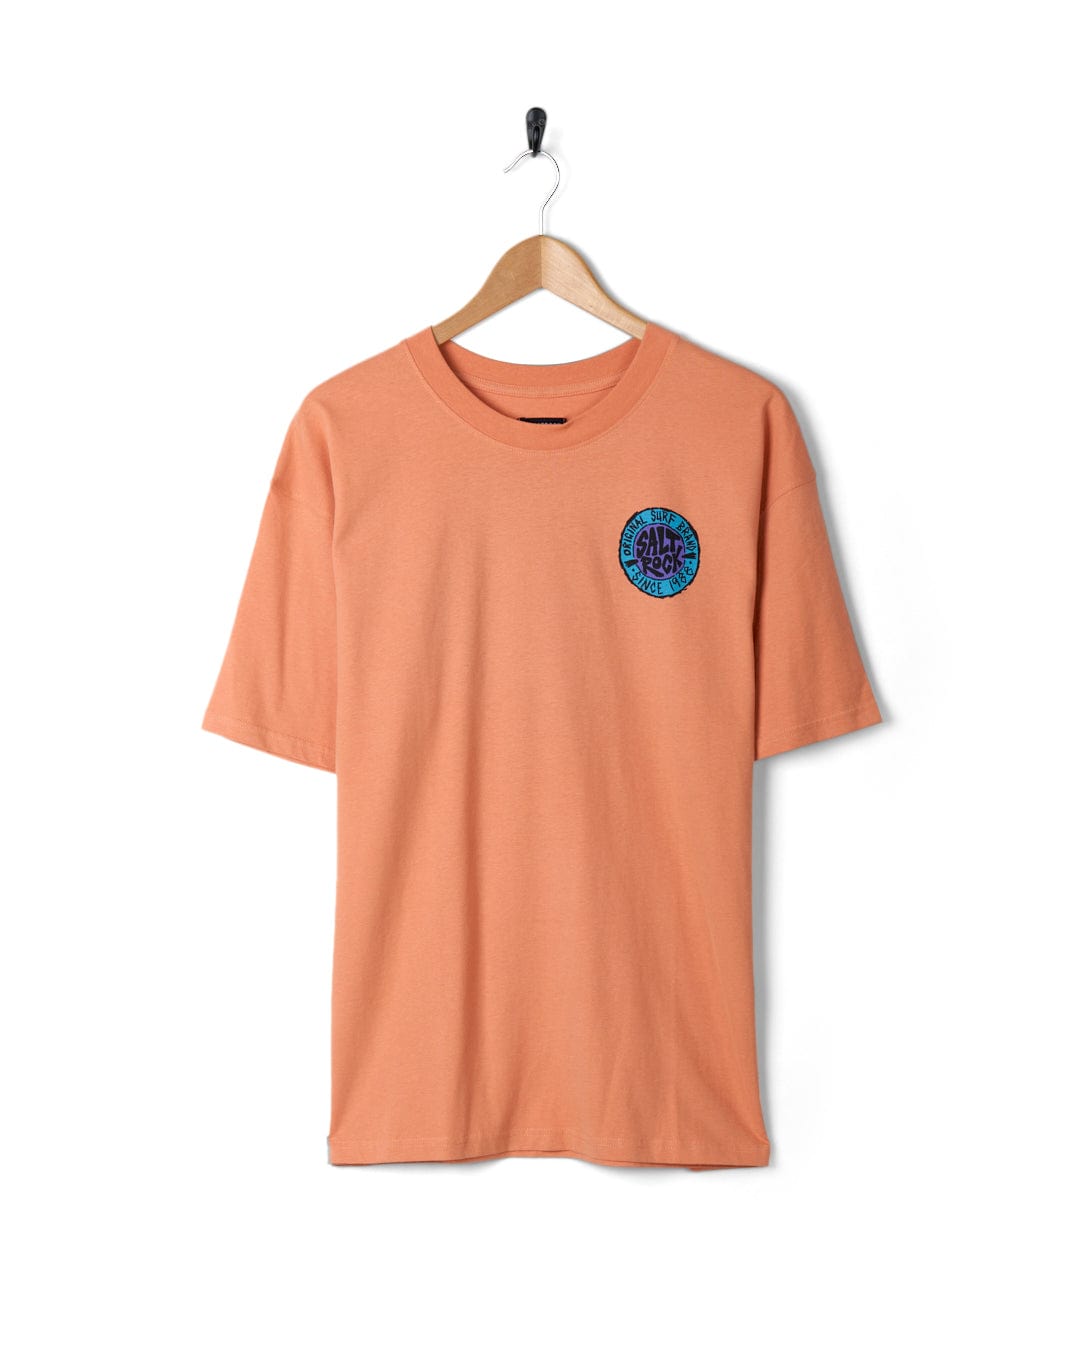 An oversized SR Originals - Mens Short Sleeve T-Shirt in Peach with a small blue emblem on the chest, featuring a retro surf graphic, hanging on a wall-mounted hanger against a white background. Brand: Saltrock